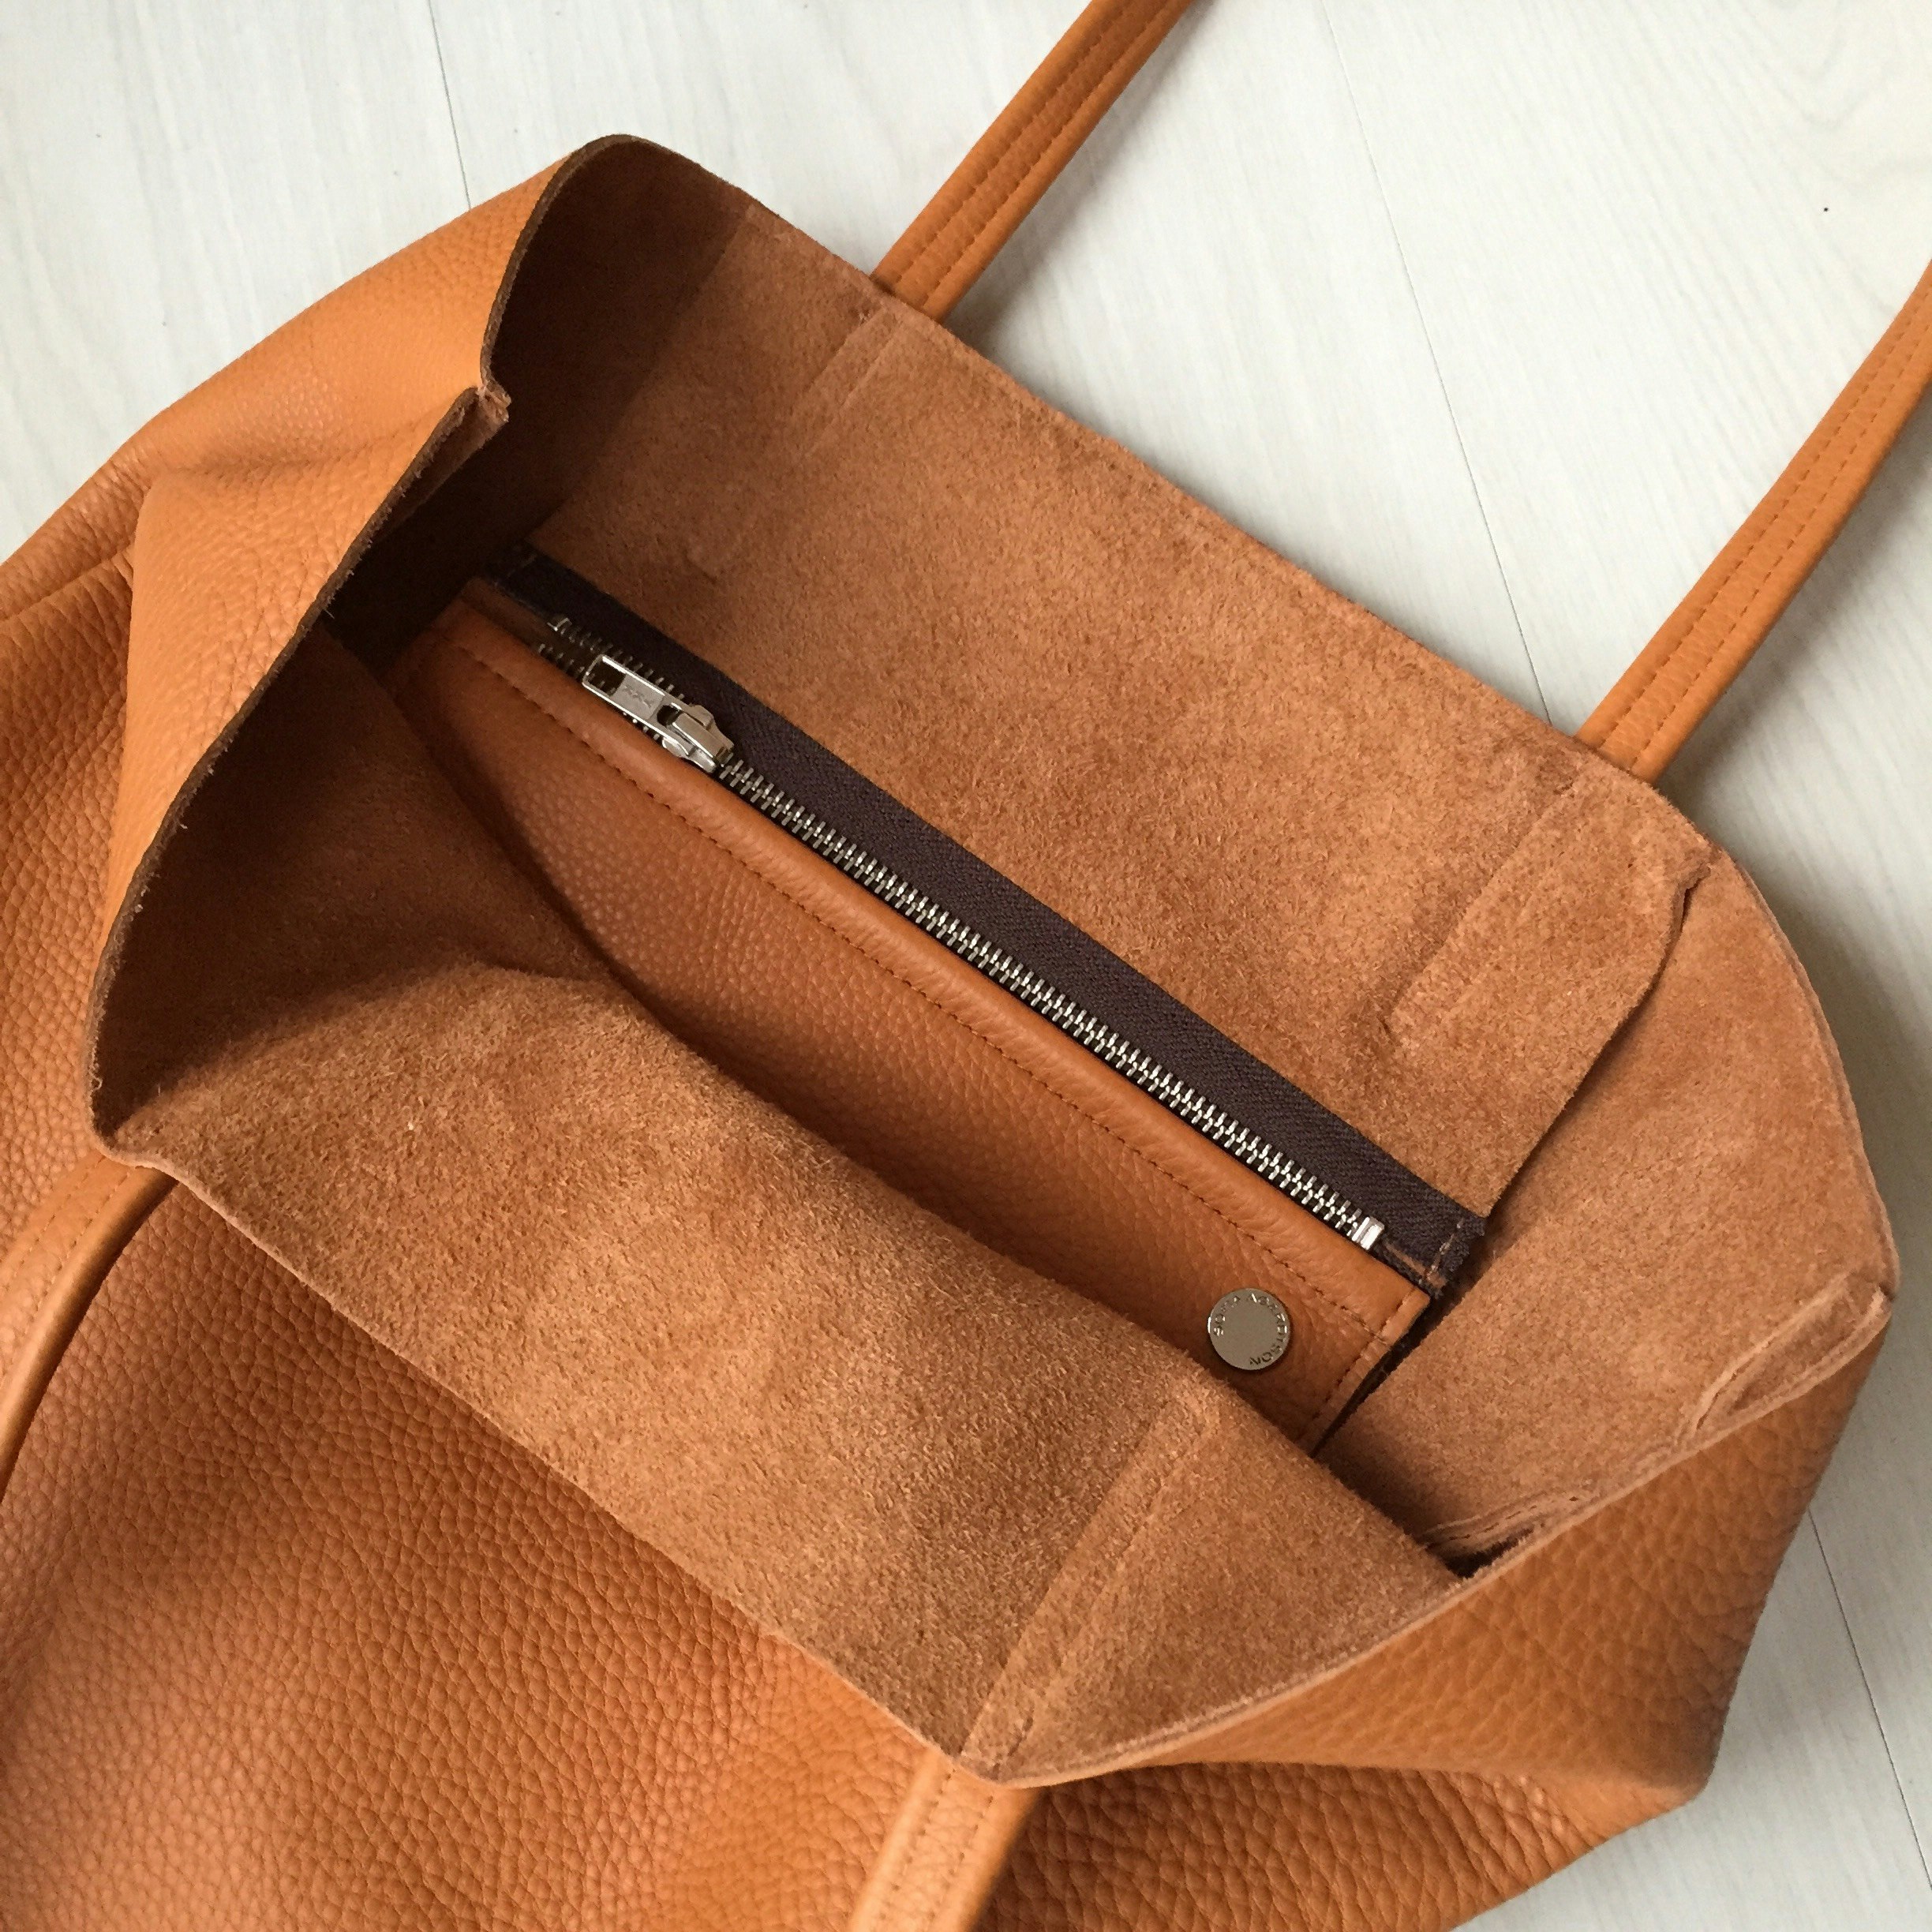 Raw Leather Tote Bag - Cognac